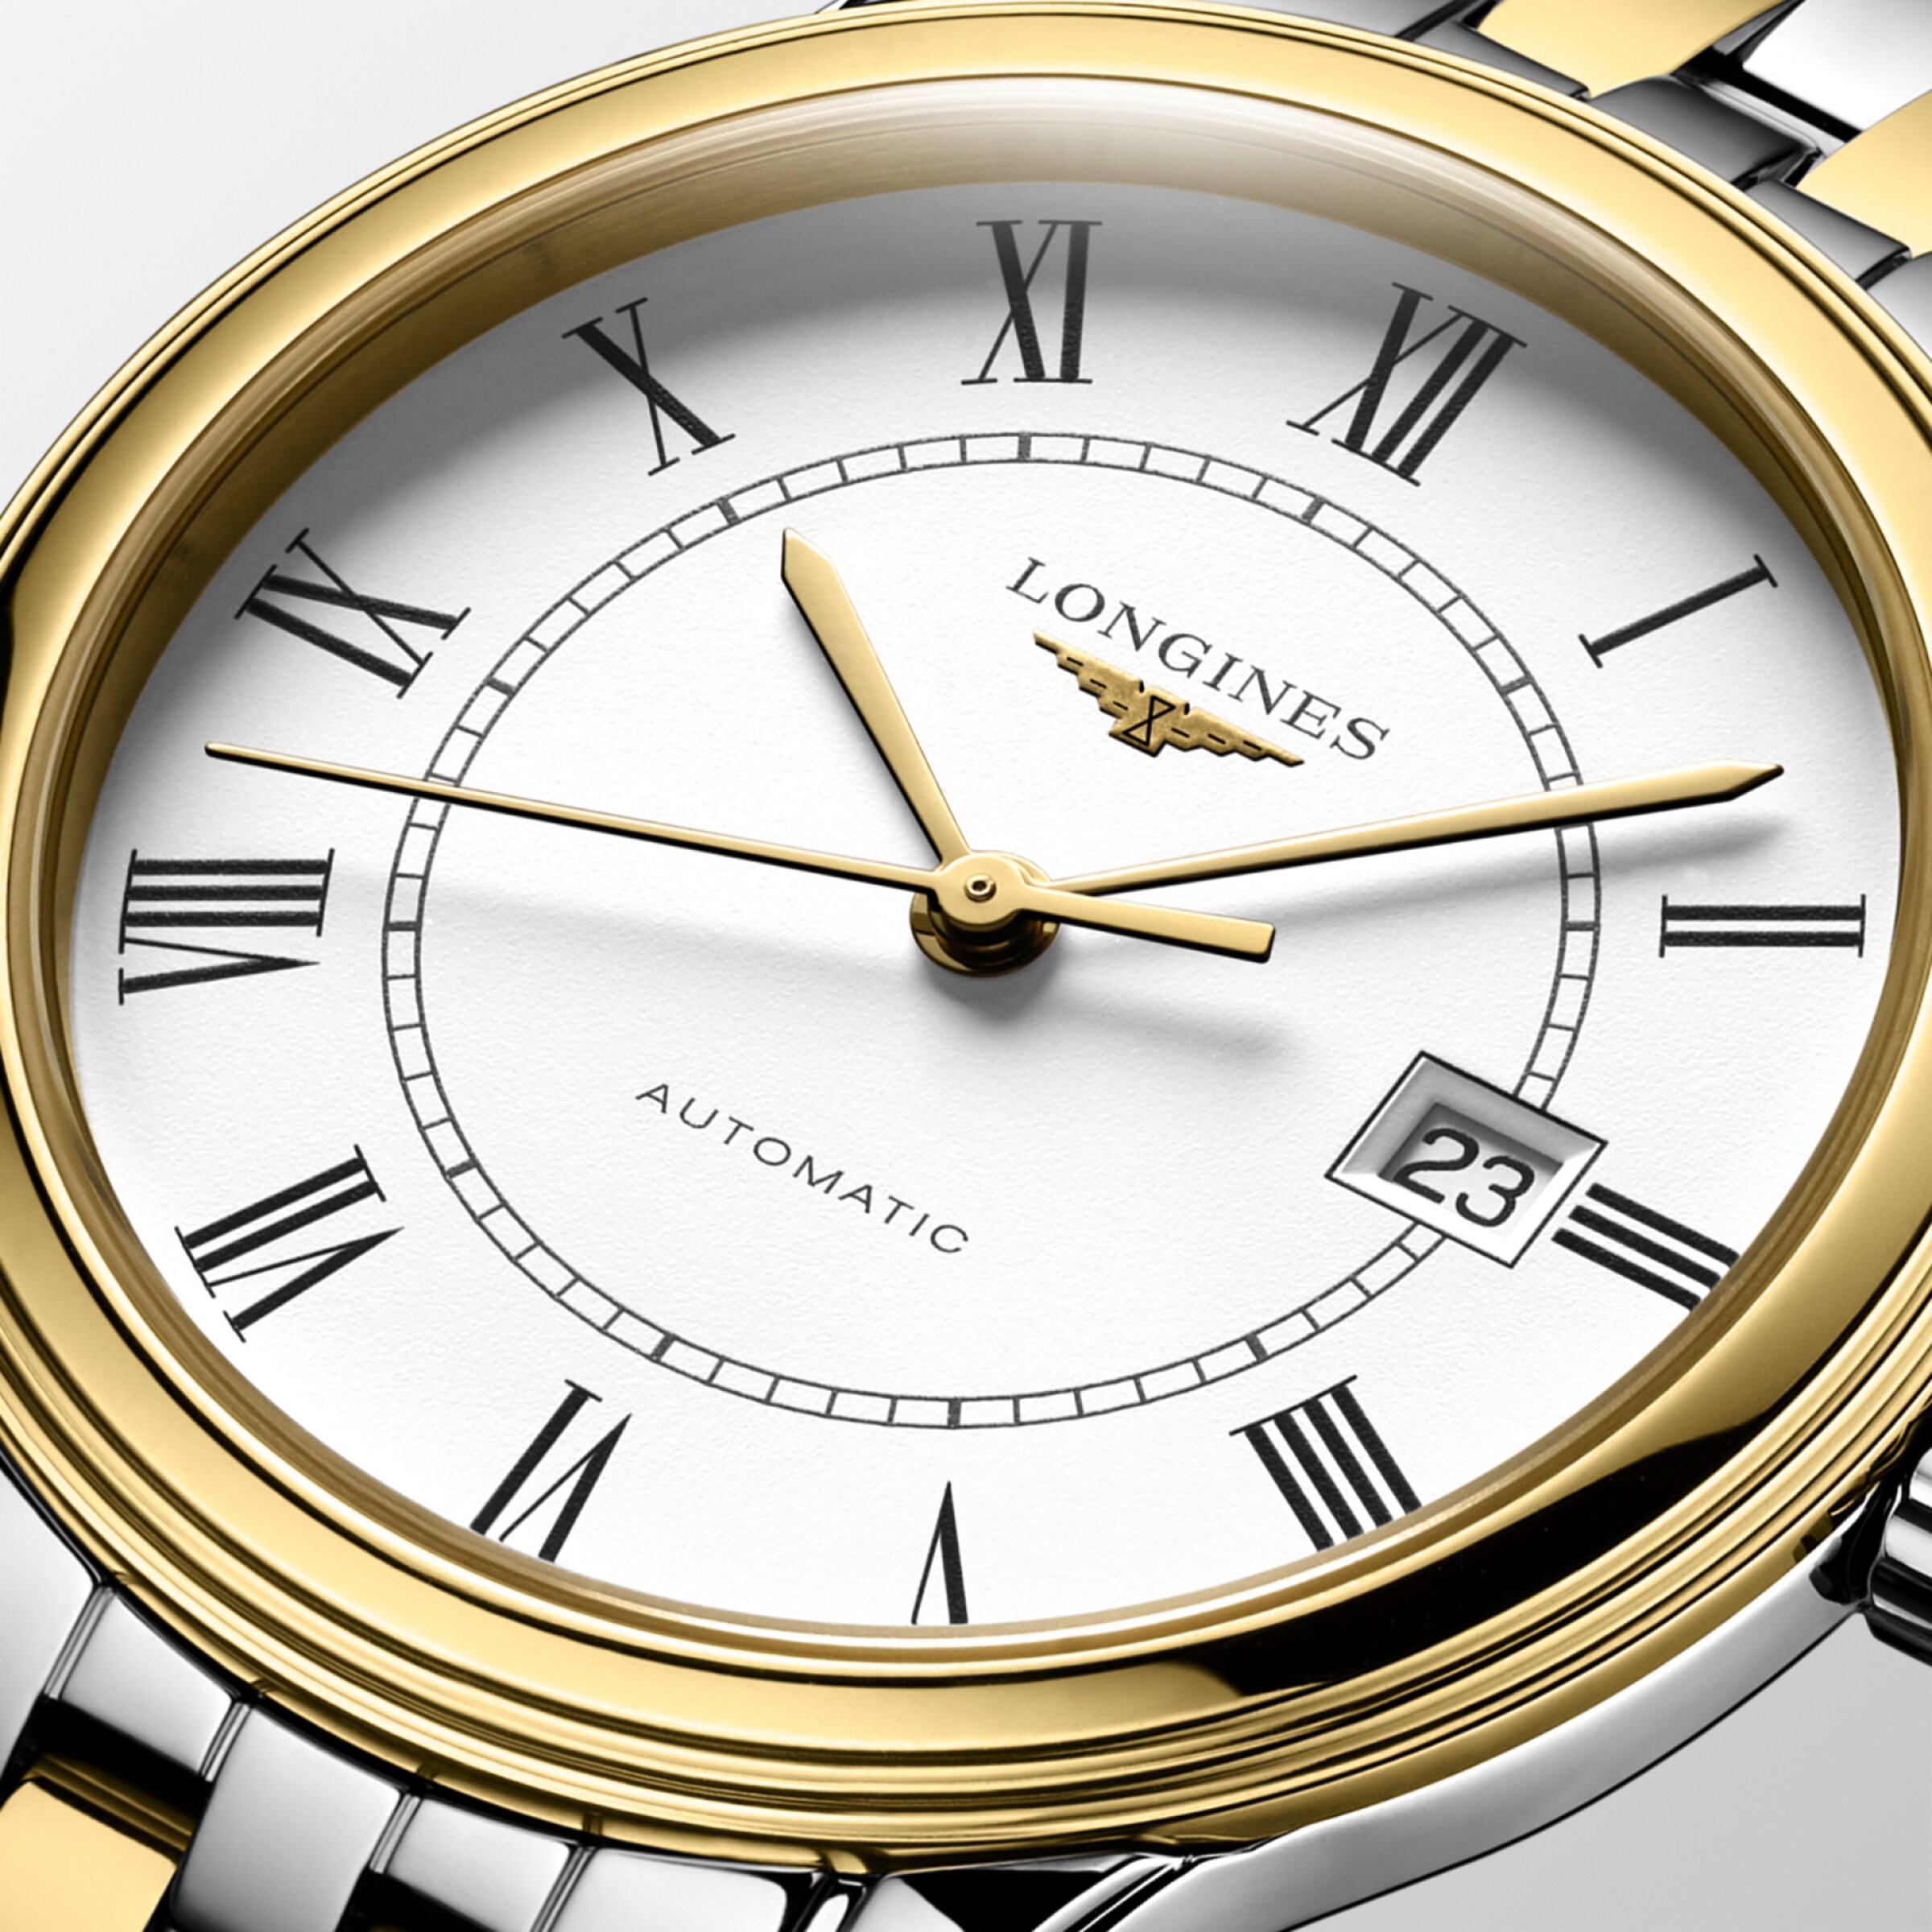 Longines FLAGSHIP Automatic Stainless steel and yellow PVD coating Watch - L4.374.3.21.7